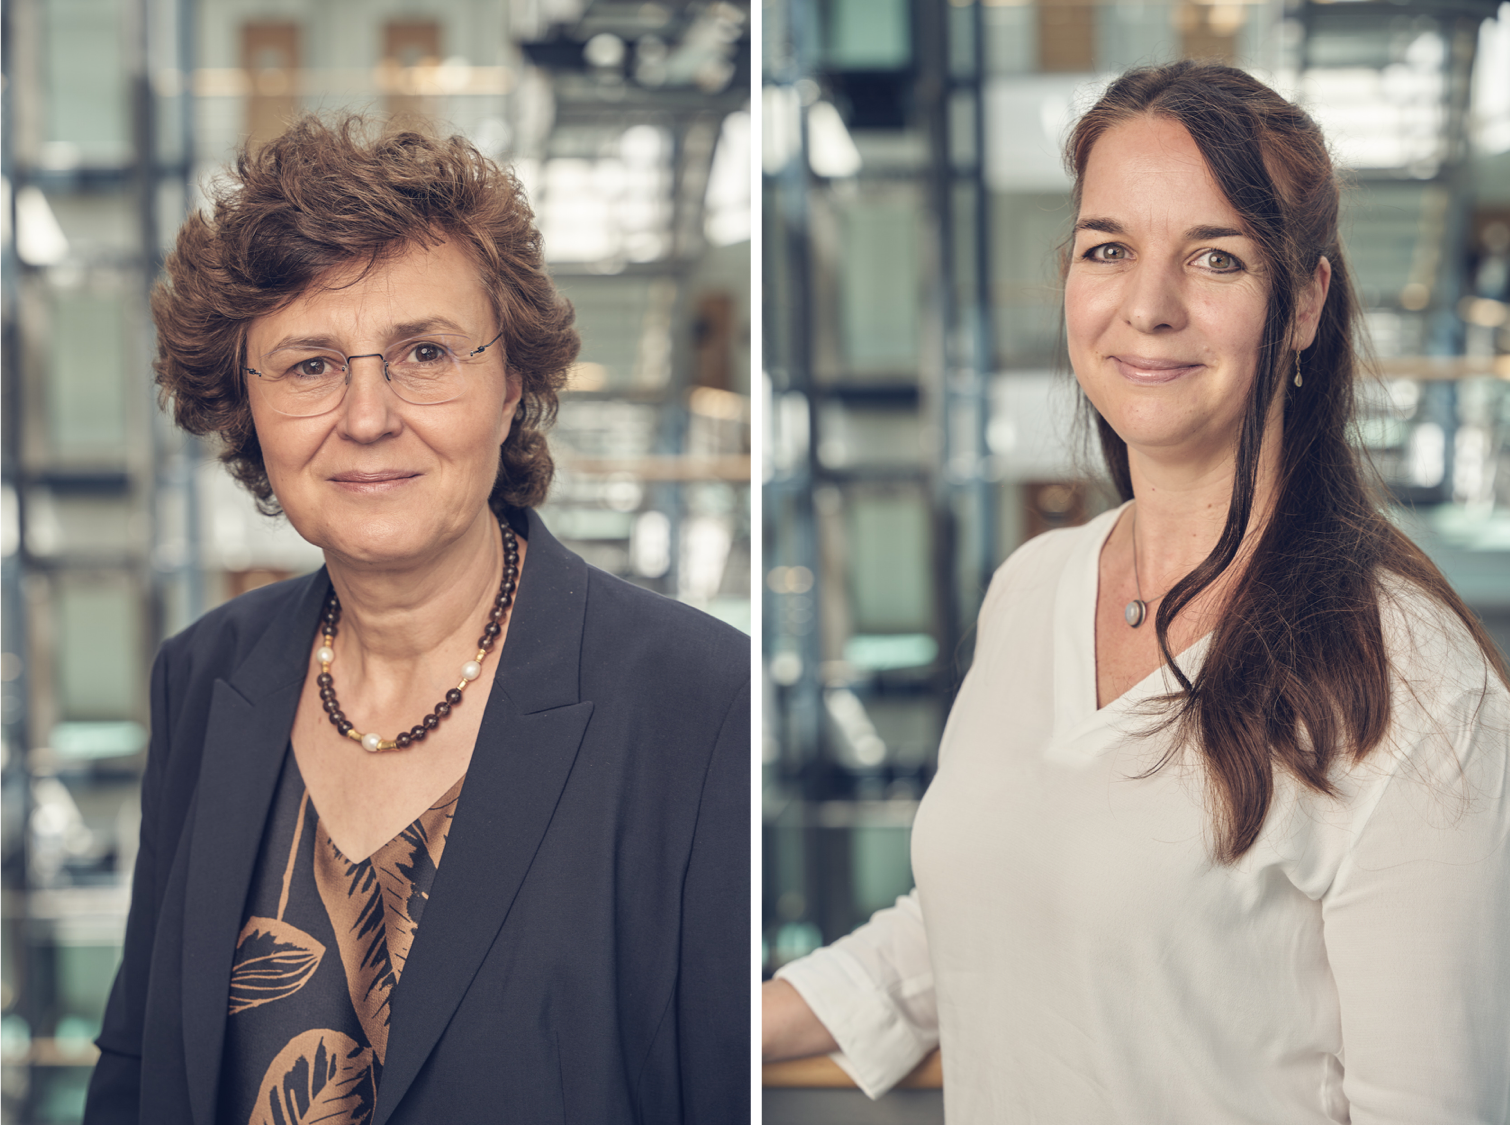 Portrait photo of Prof. Dr. Sabine Kulling, coordinator of the innovation space NewFoodSystems (left) and portrait photo of Dr. Melanie Huch, head of In4Food, scientist at the Max Rubner Institute (right)